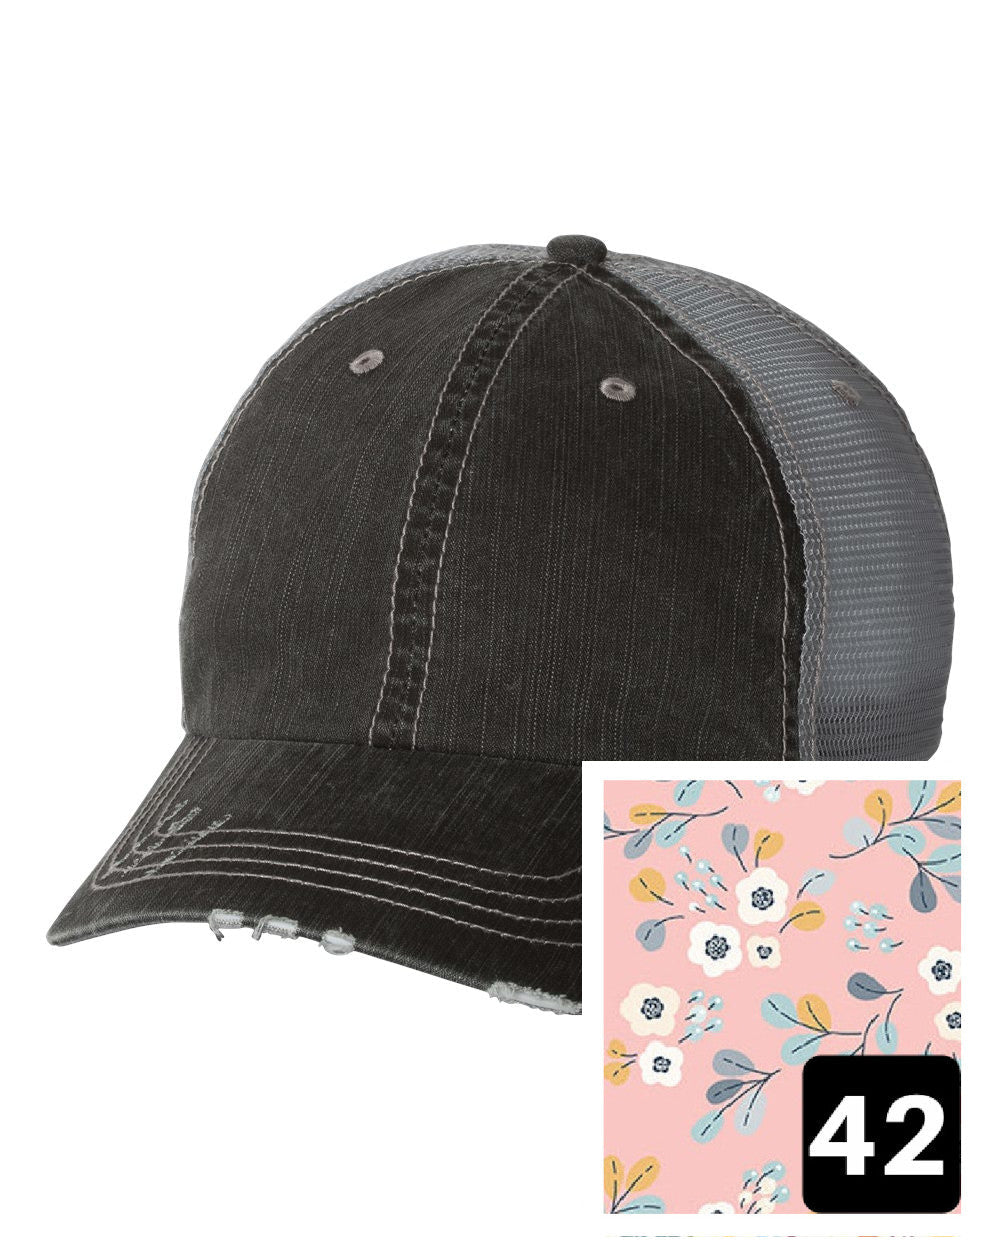 gray distressed trucker hat with light blue and pink mosaic fabric state of Utah